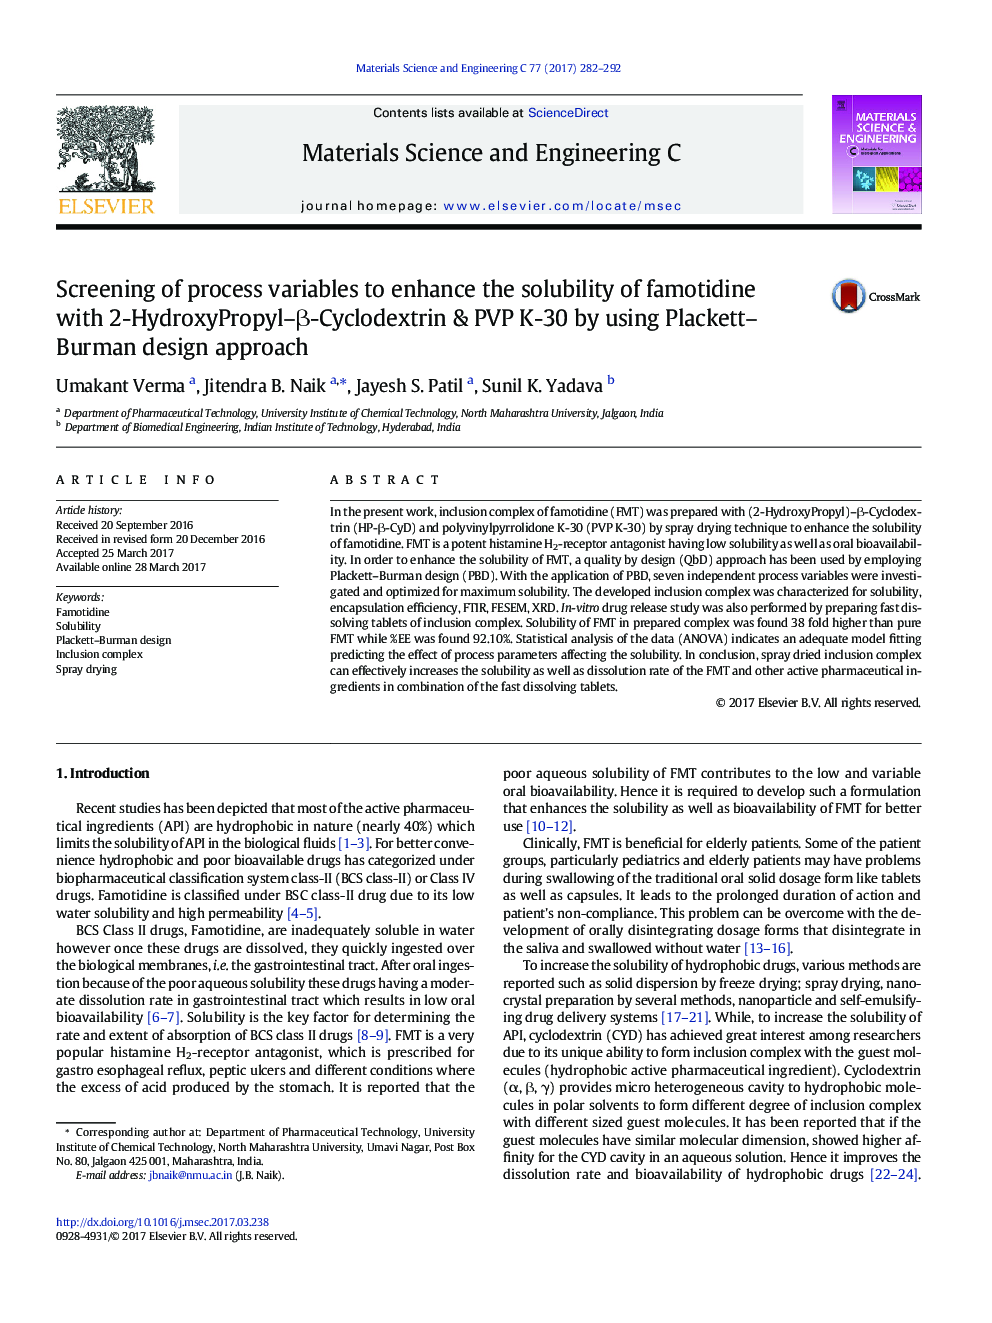 Screening of process variables to enhance the solubility of famotidine with 2-HydroxyPropyl-Î²-Cyclodextrin & PVP K-30 by using Plackett-Burman design approach